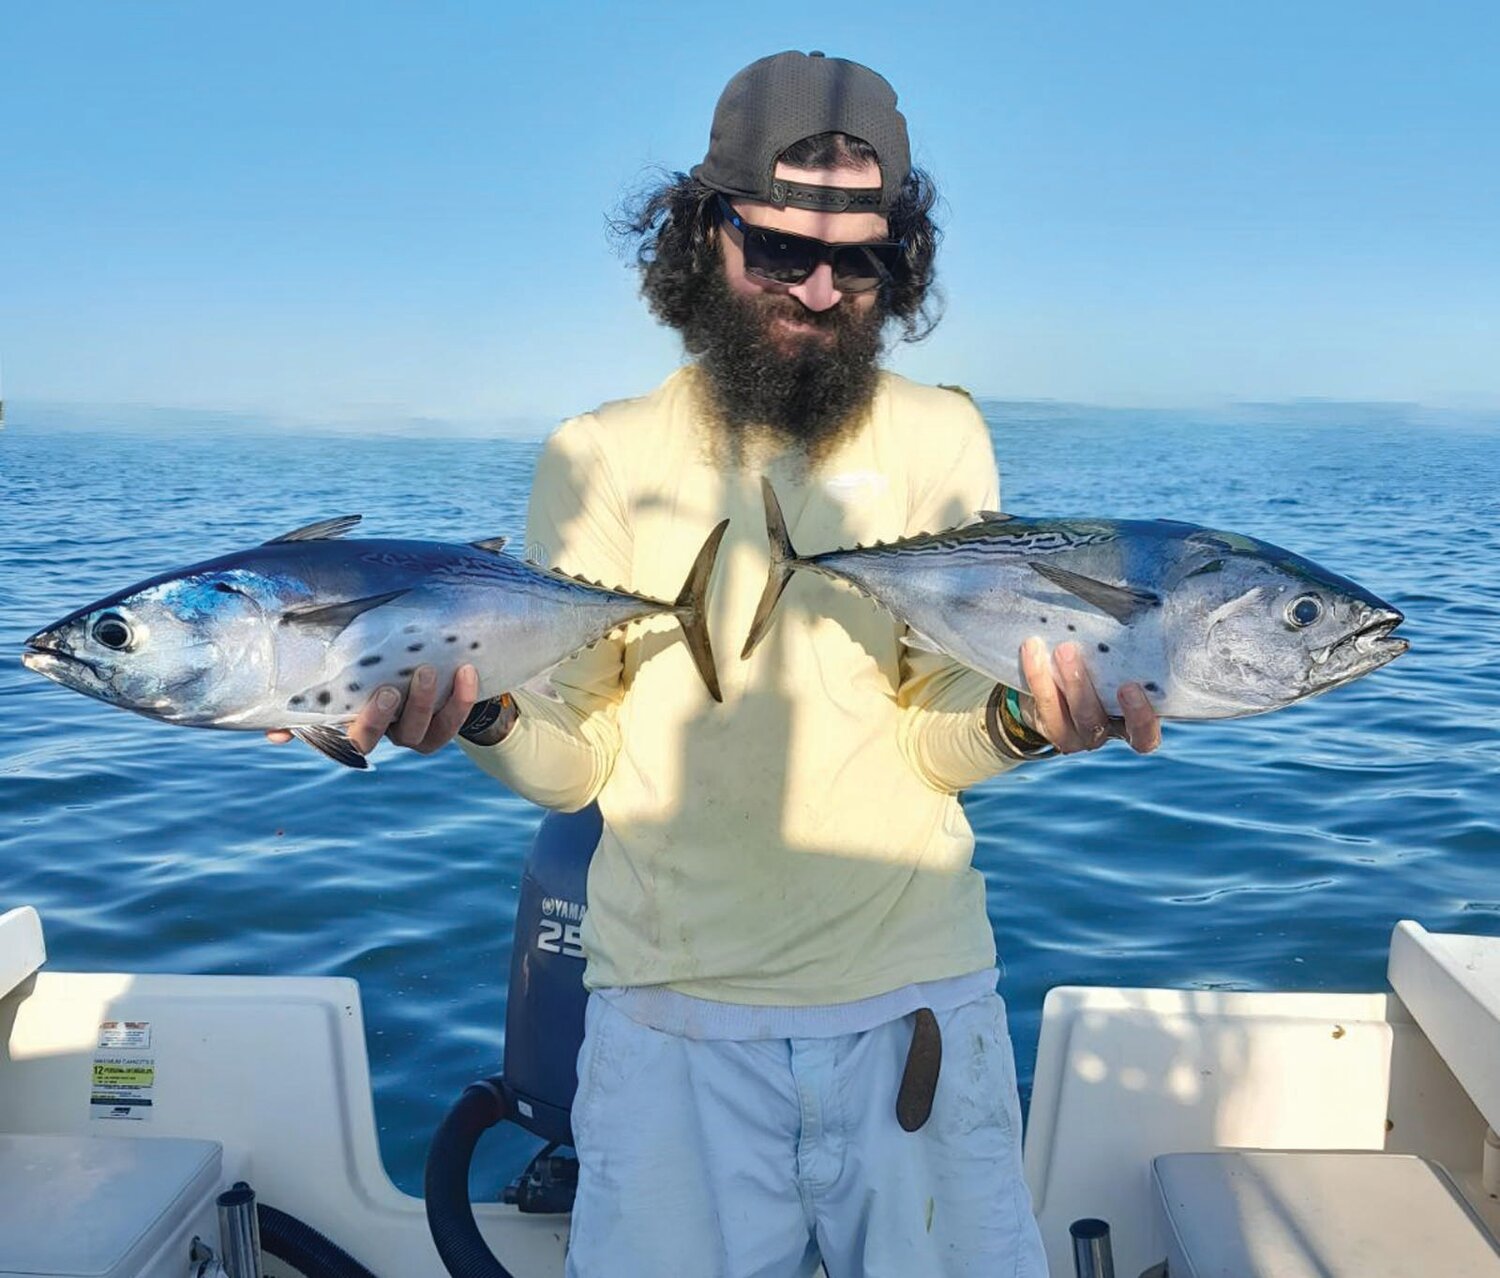 DOUBLE HOOK-UP: Jeff Sullivan of Lucky Bait & Tackle, Warren, with the two false albacore he caught at the same time while working two fishing rods off Brenton Reef, Newport. (Submitted photos)